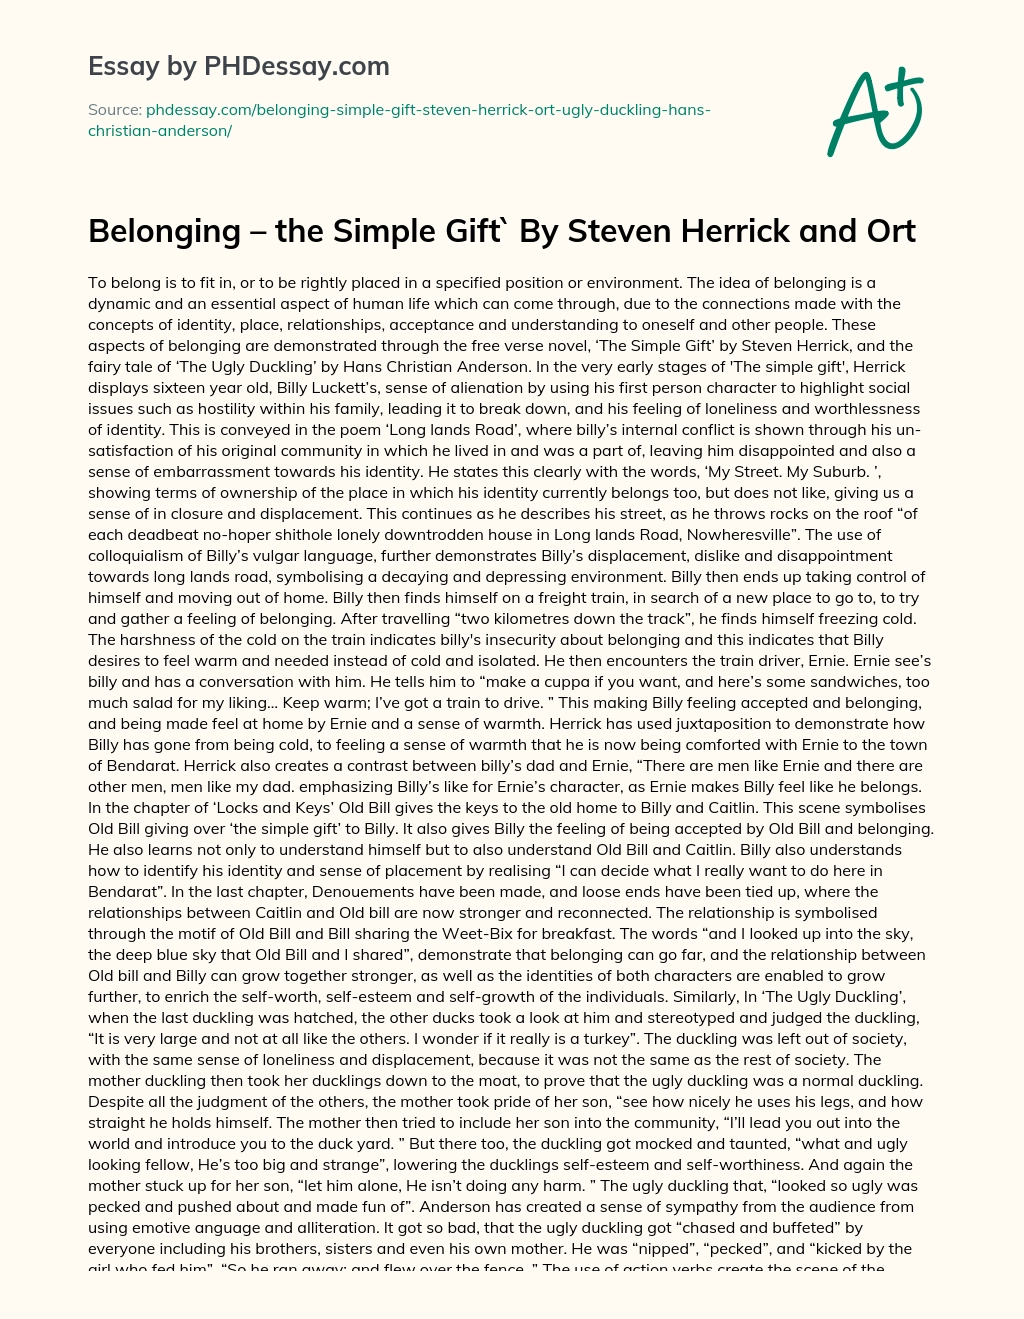 Belonging – the Simple Gift` By Steven Herrick and Ort essay